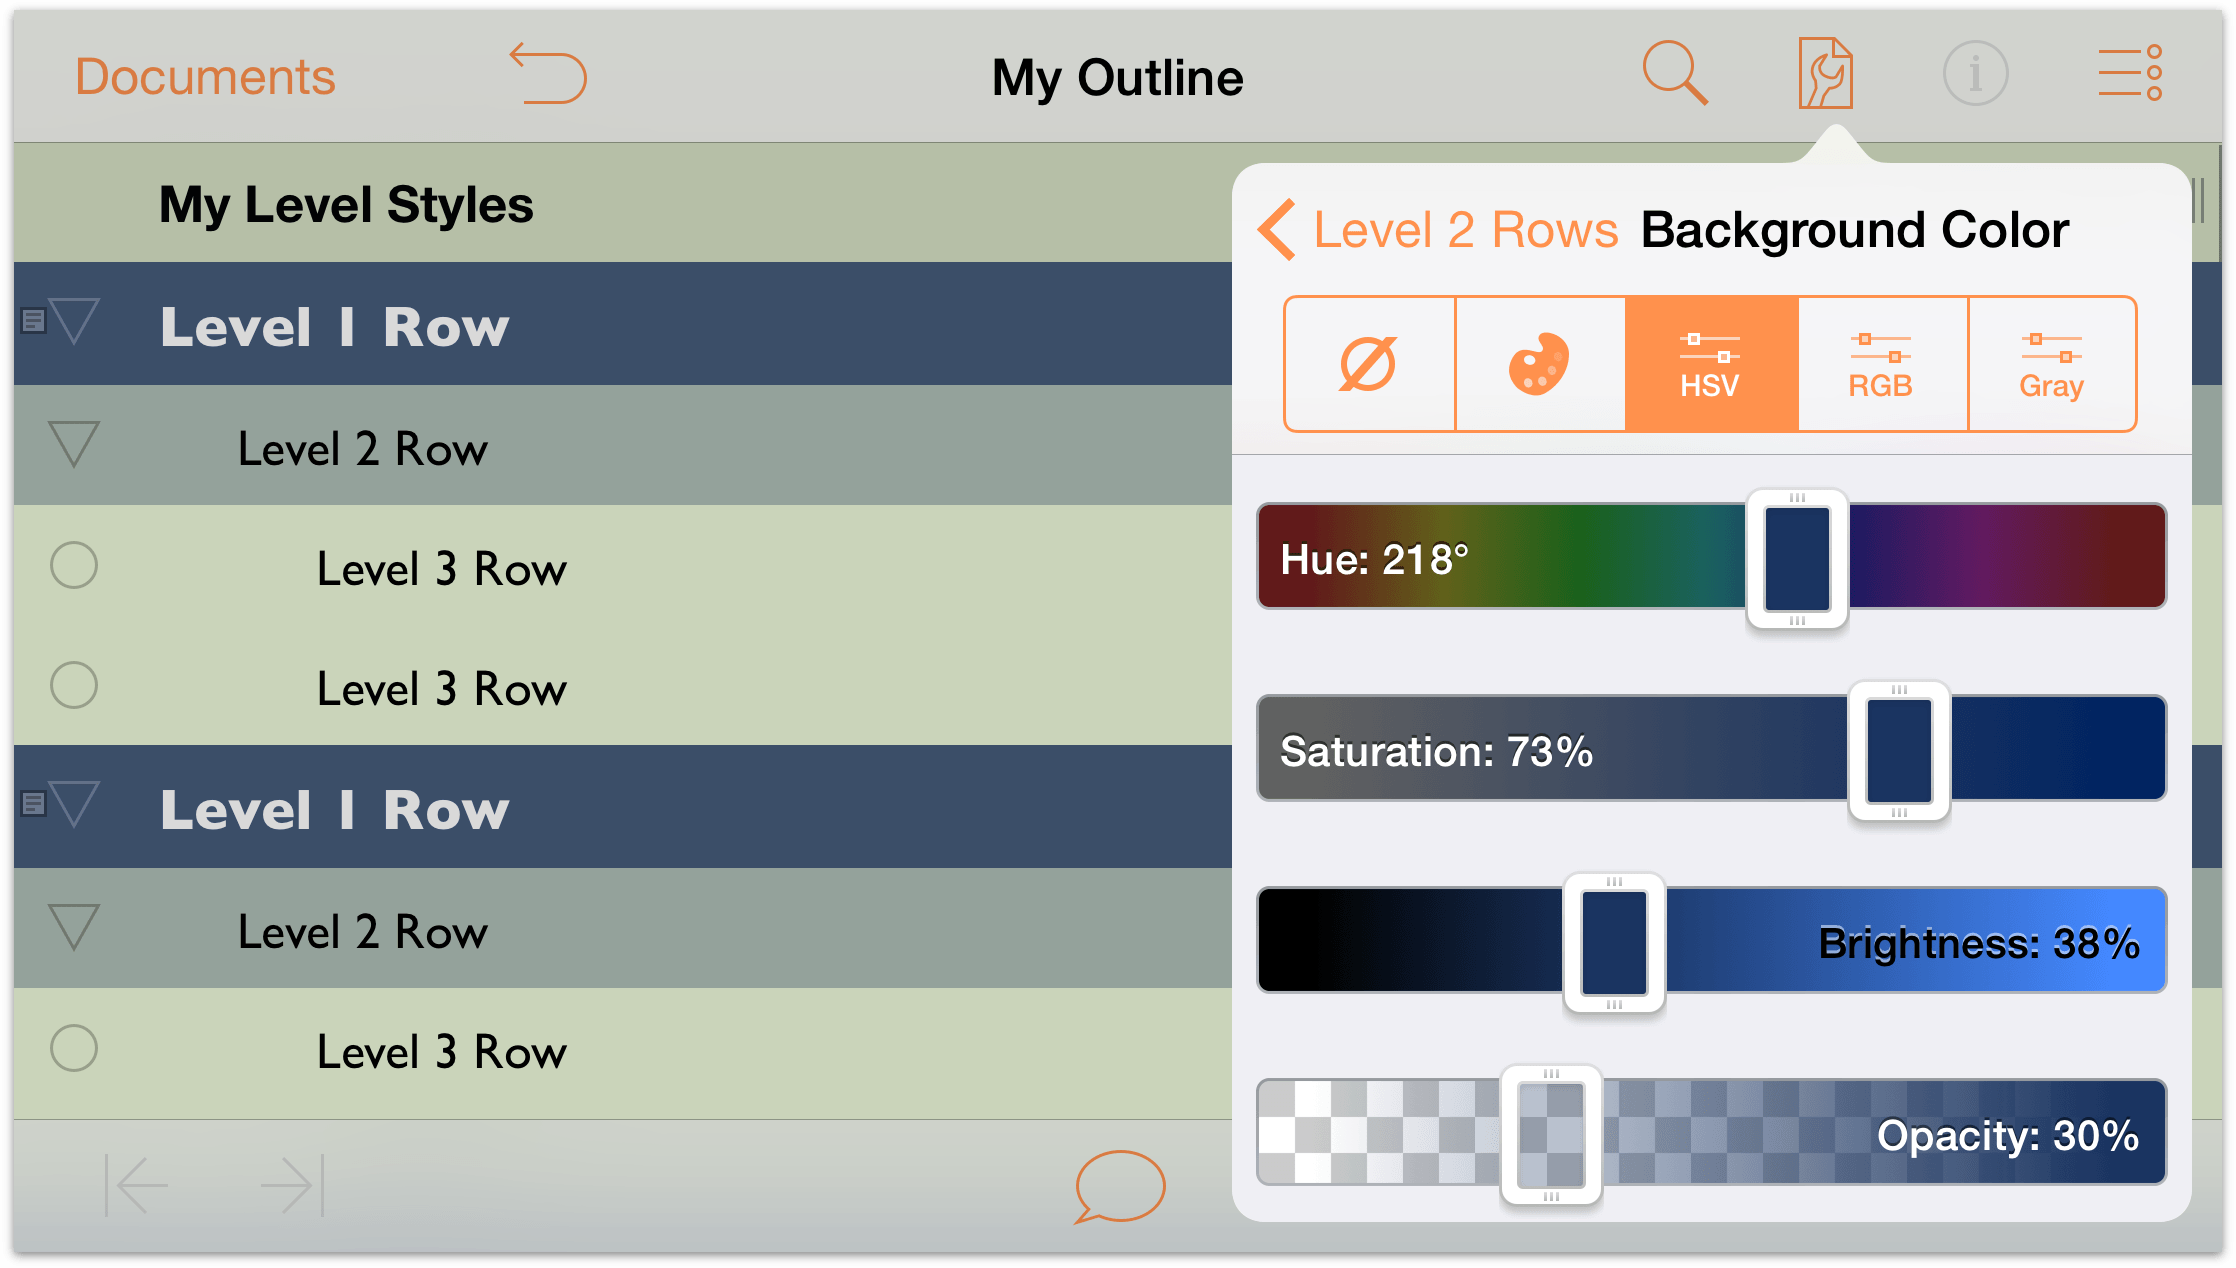 Setting the background color for Level 3 Rows